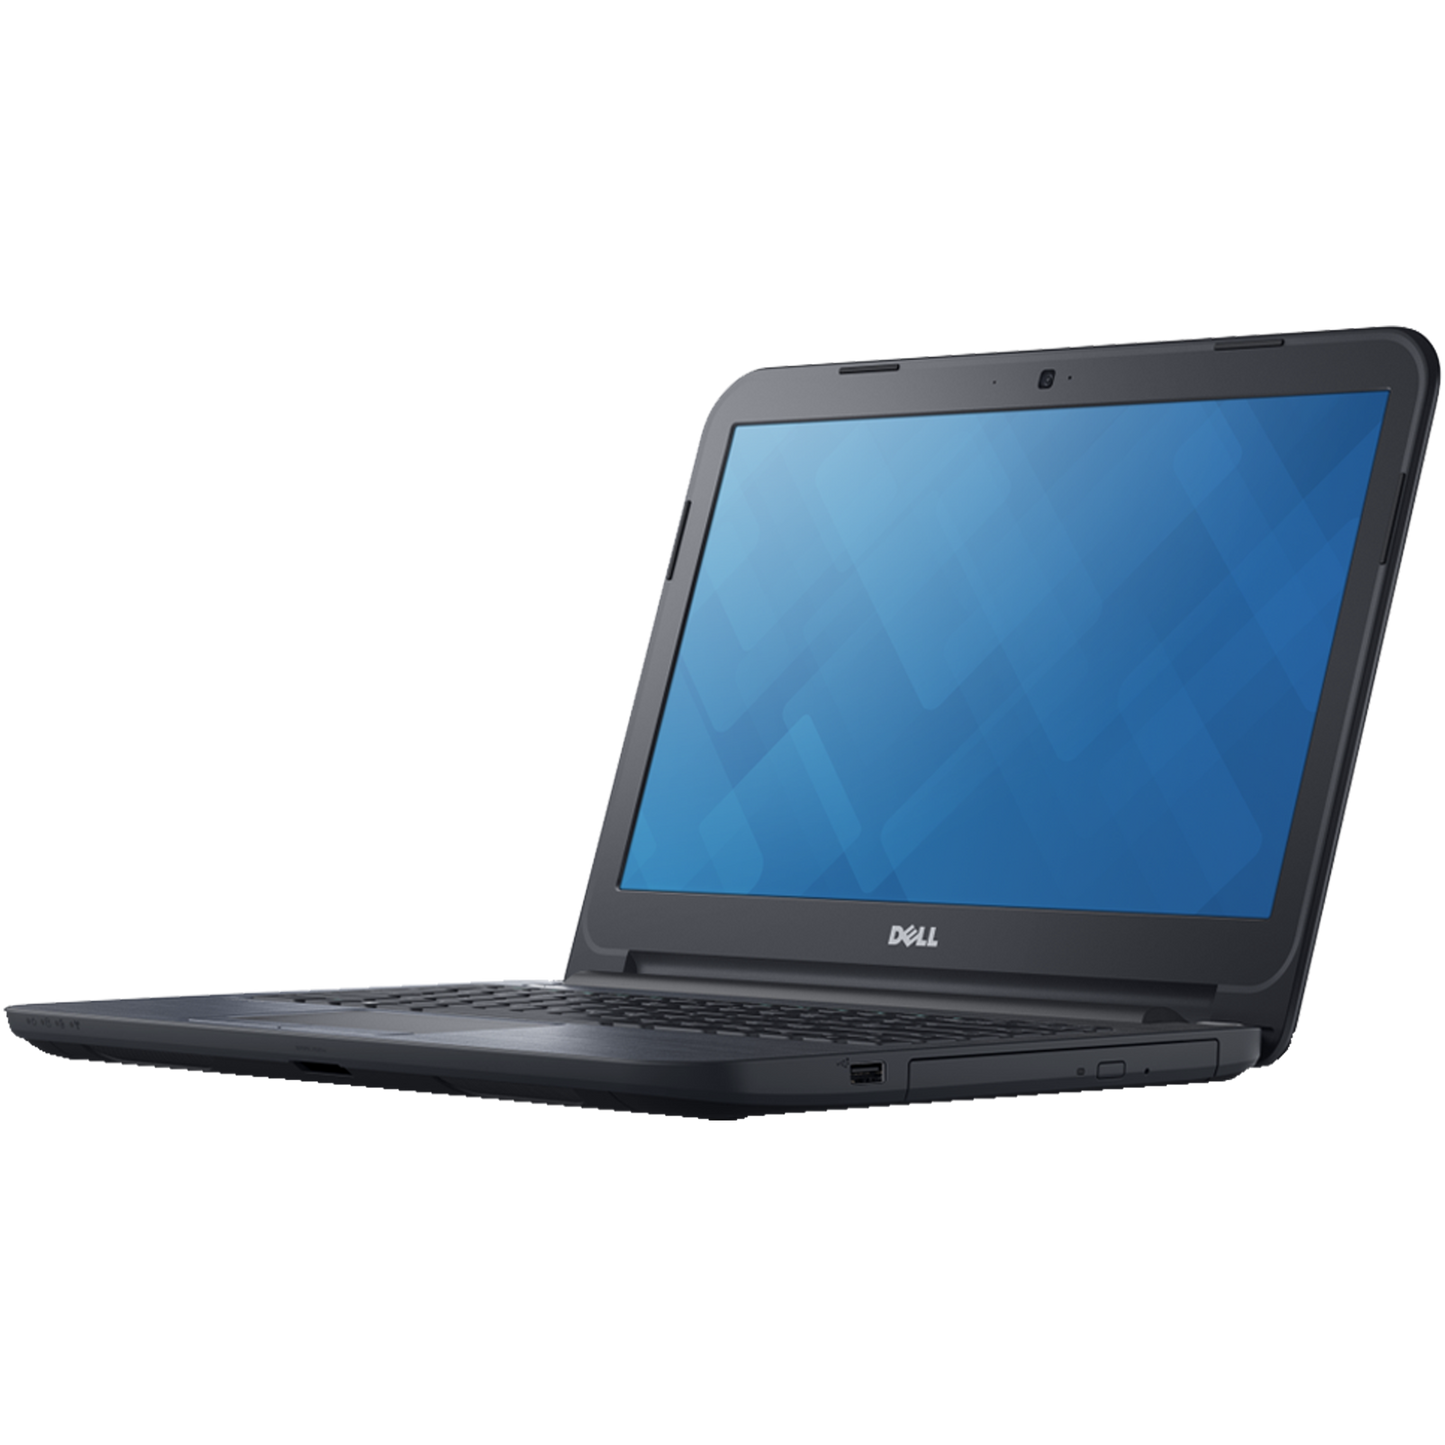 Dell Latitude 5440 Intel i7, 4th Gen Laptop with Dedicated Graphics Laptops - Refurbished